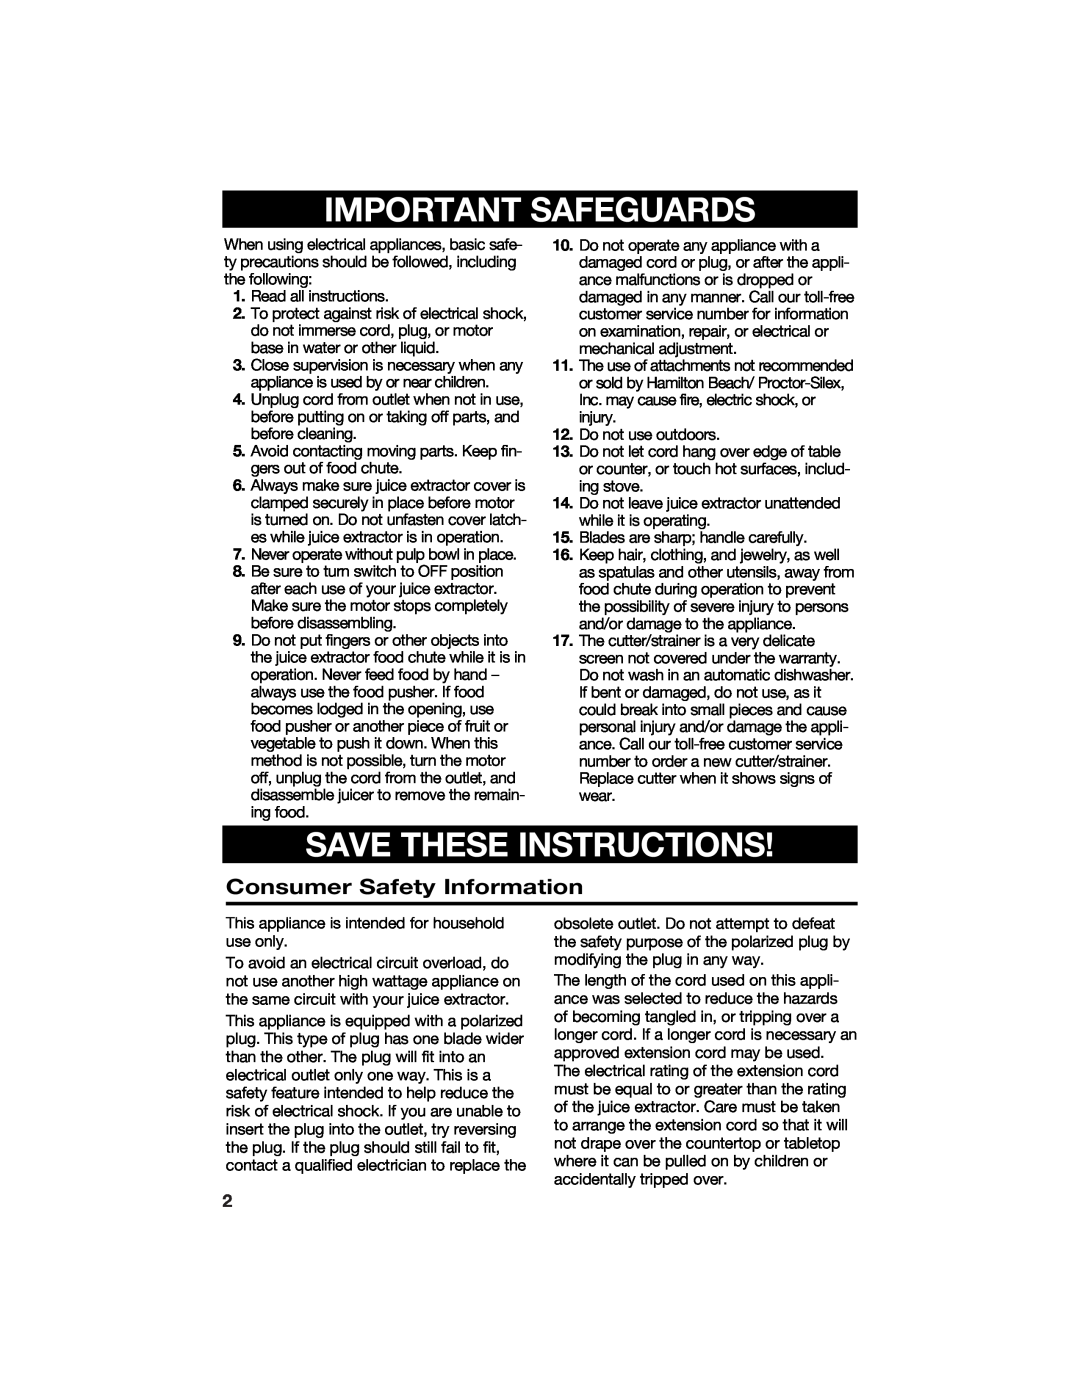 Hamilton Beach 840097100 manual Consumer Safety Information, Important Safeguards, Save These Instructions 